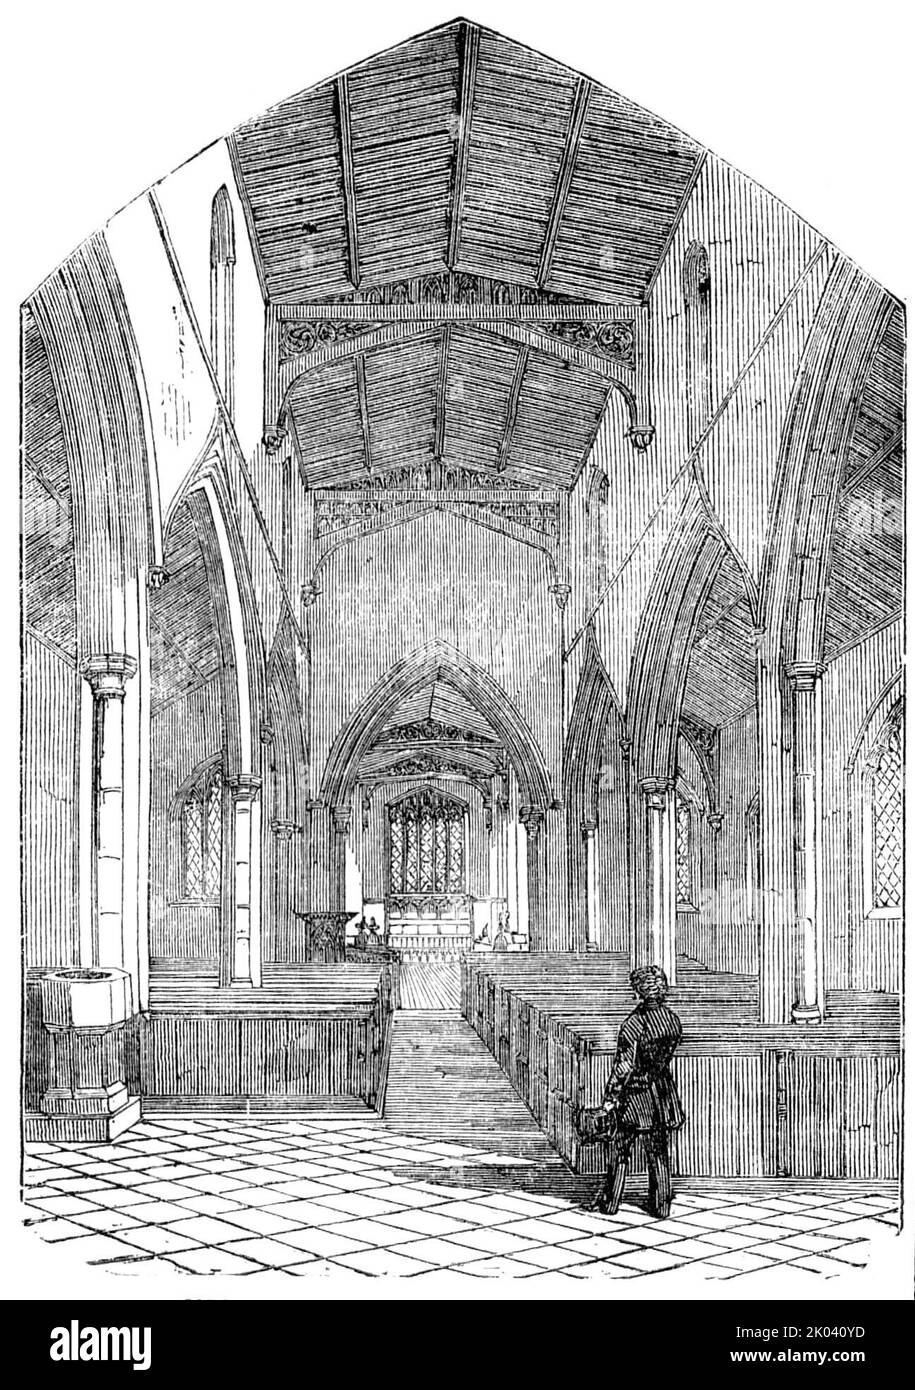 Restoration of St. Nicholas Church, Islip, Northamptonshire, 1854. 'The Church has been reseated with...oak. The stone work to the arcades and windows has been repaired, and the walls re-plastered. The tower arch has been thrown open...and a new belfry floor constructed. A new carved oak pulpit has also been set up...At the back of the altar is a reredos, of Caen stone...underneath are Minton's ornamental tiles. The brass standards for lighting the Church and the lectern are by Messrs. Hardman, of Birmingham. A stained glass window has been placed in the tower...designed from old fragments fou Stock Photo